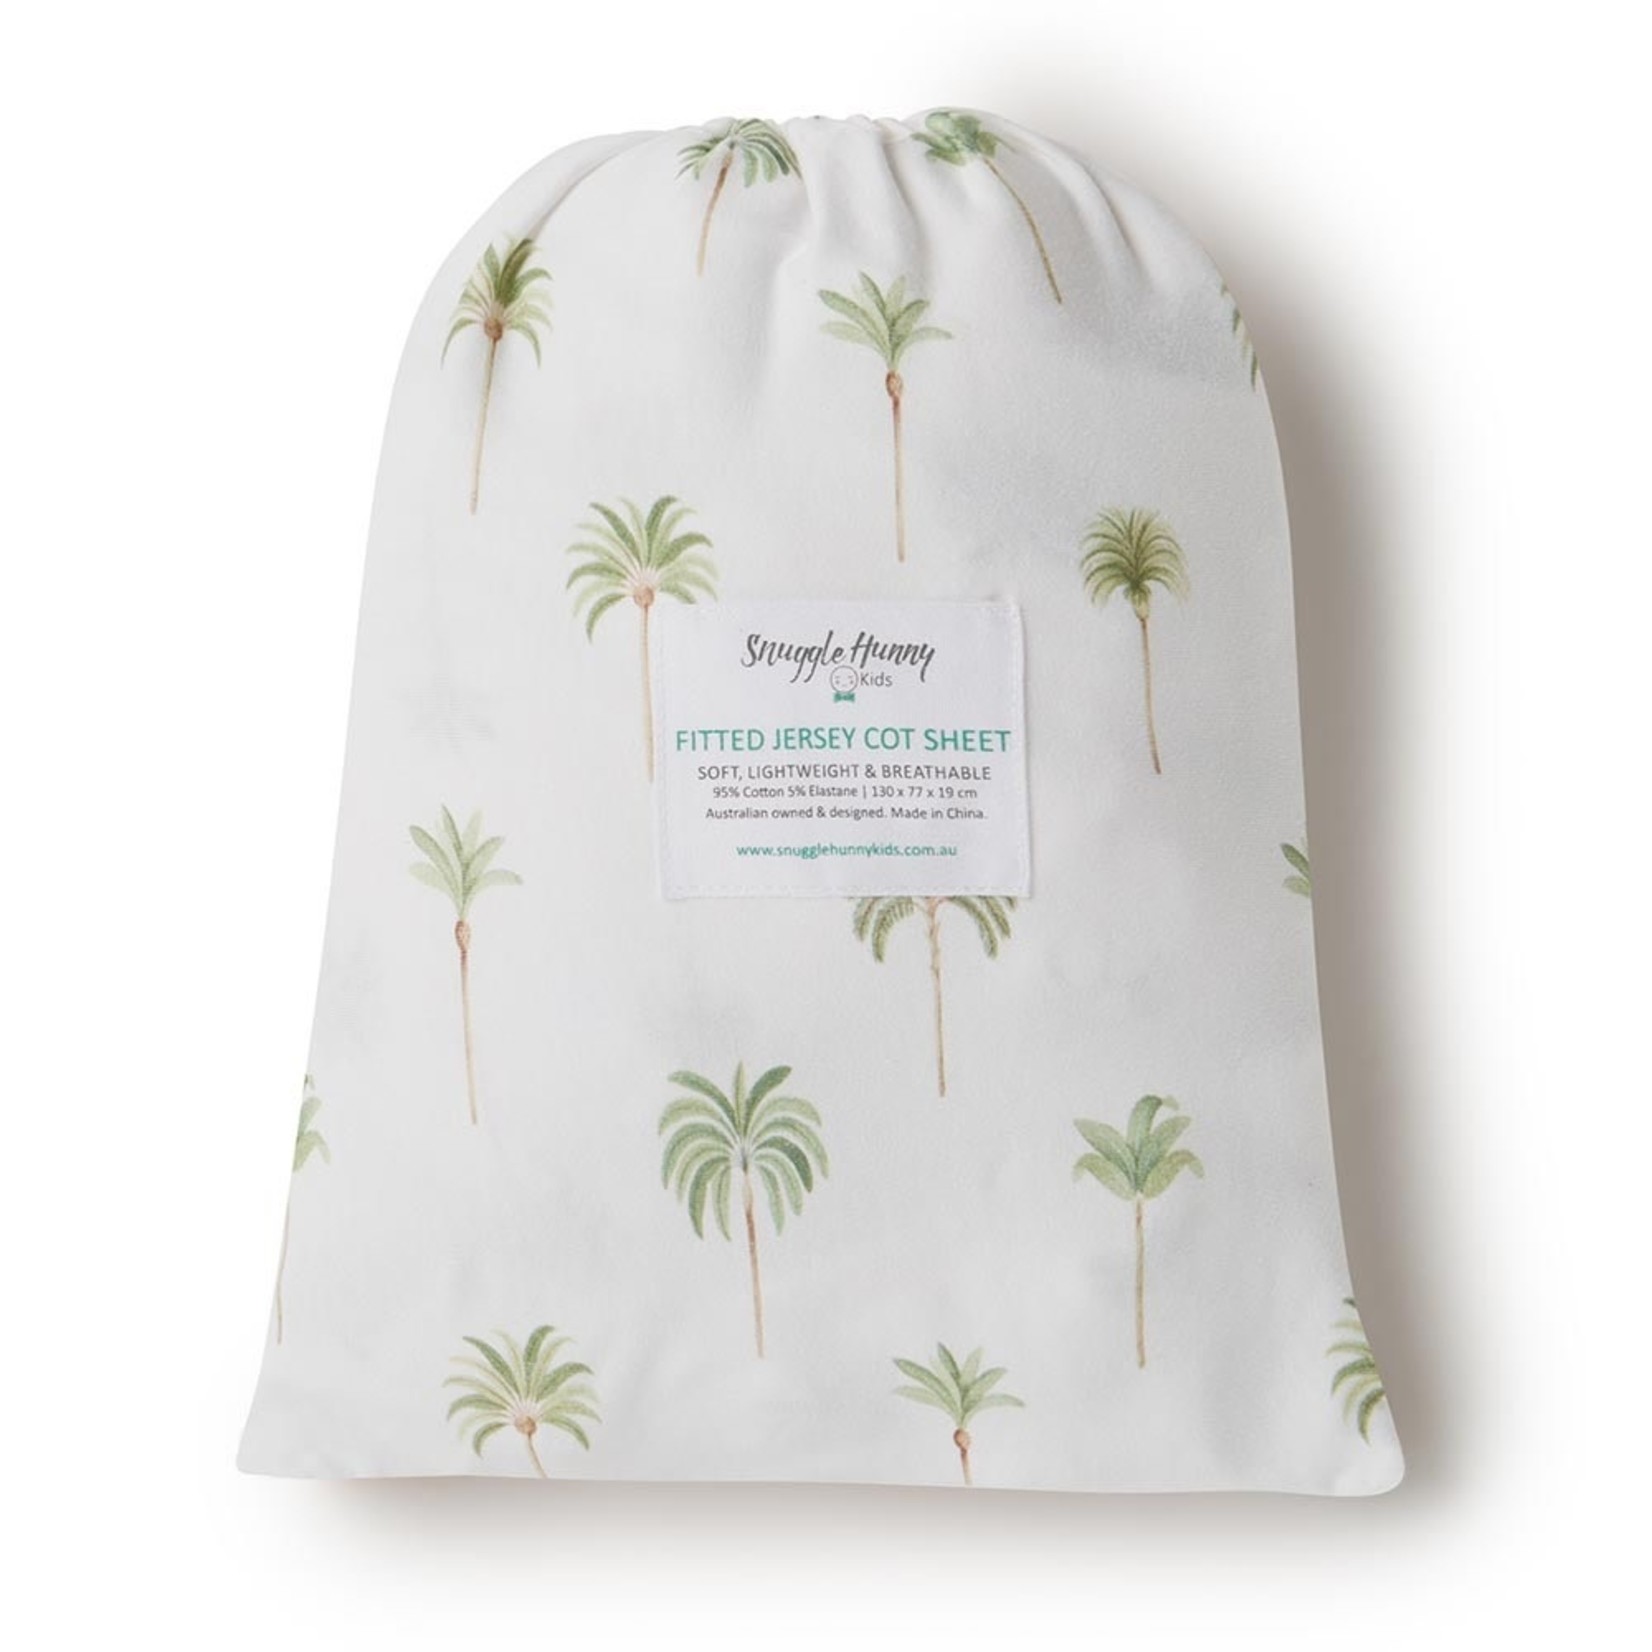 Snuggle Hunny Fitted Cot Sheet Green Palm